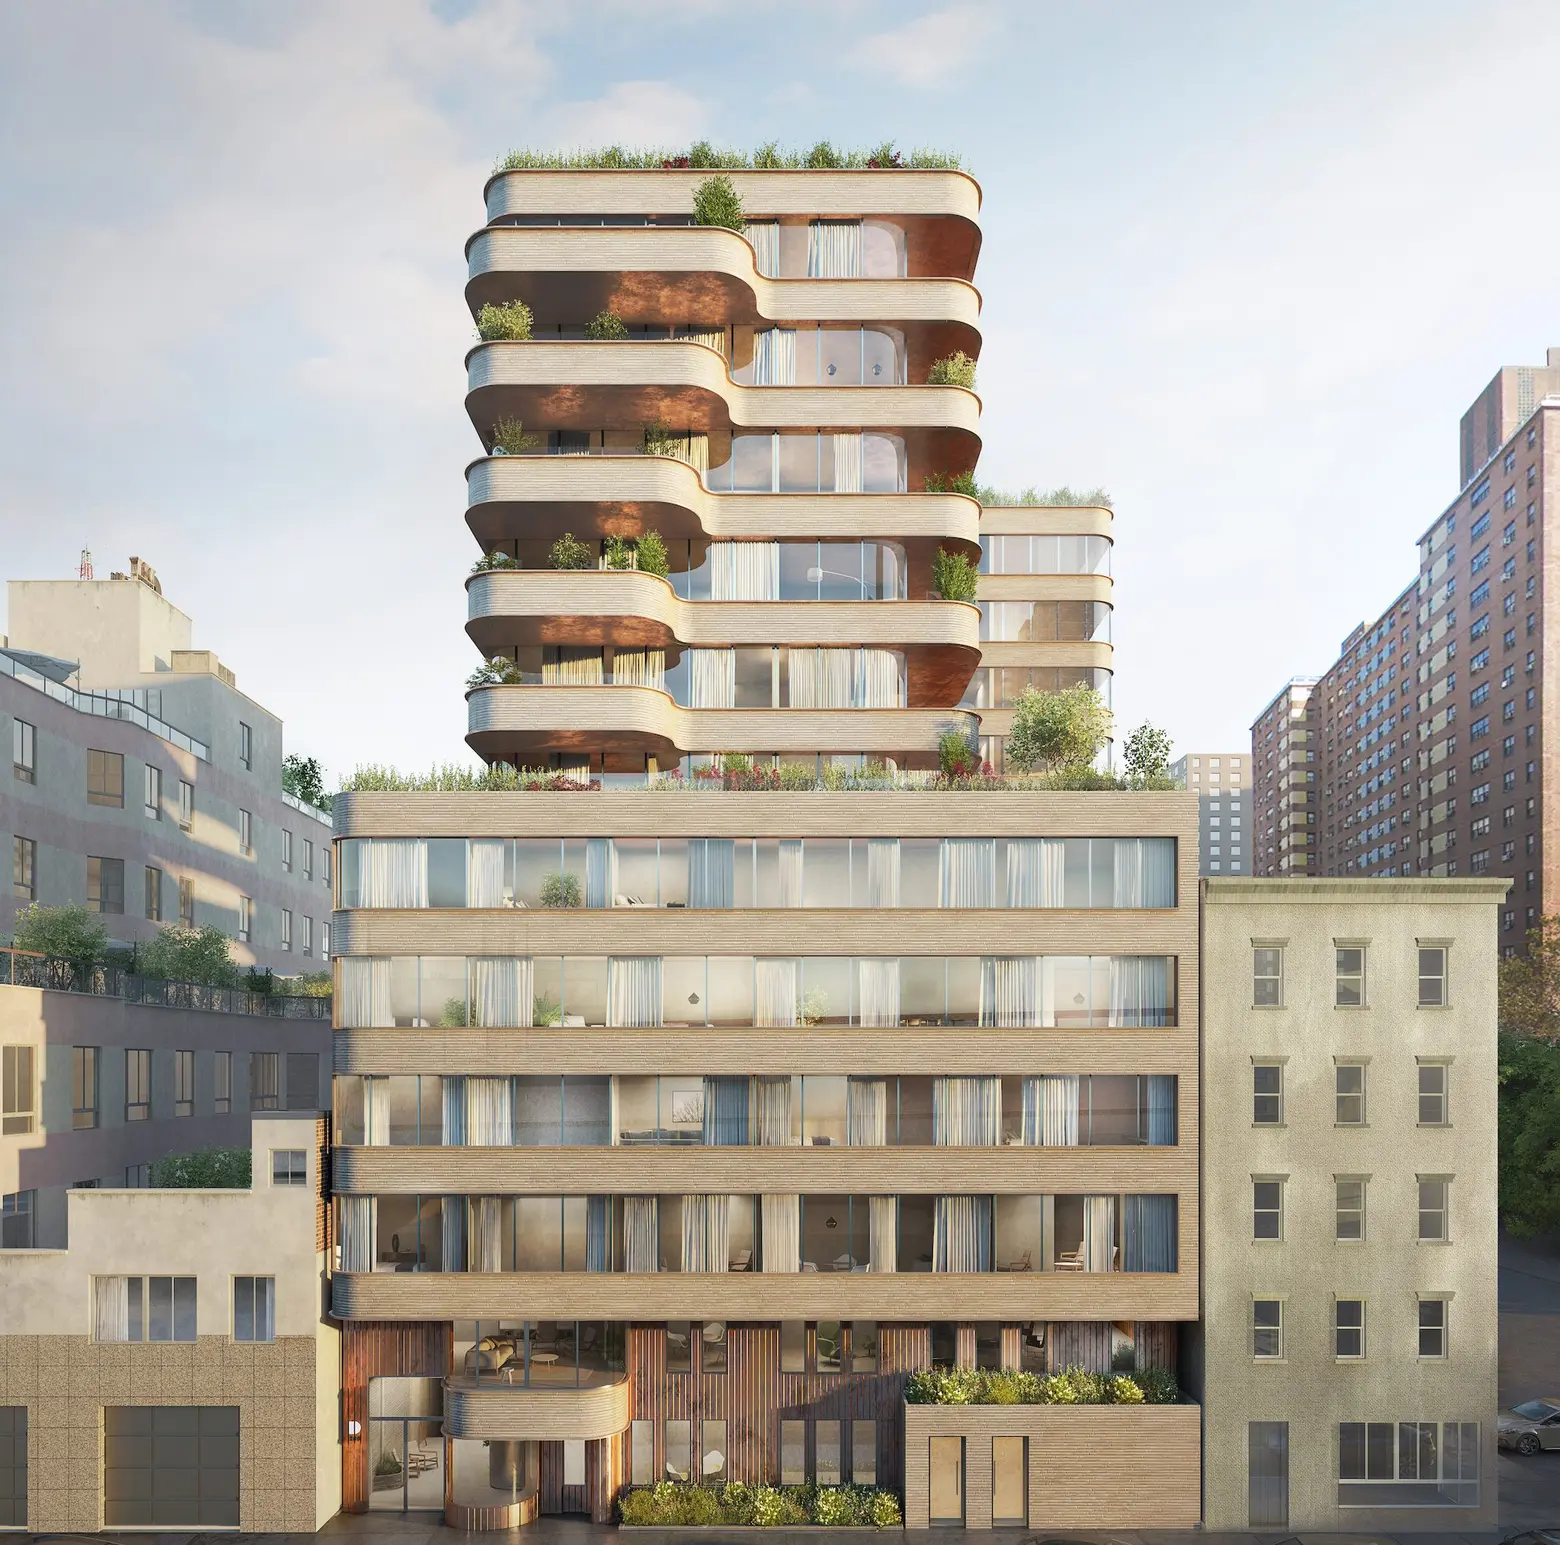 New details for ODA’s curvy condo tower on the Lower East Side